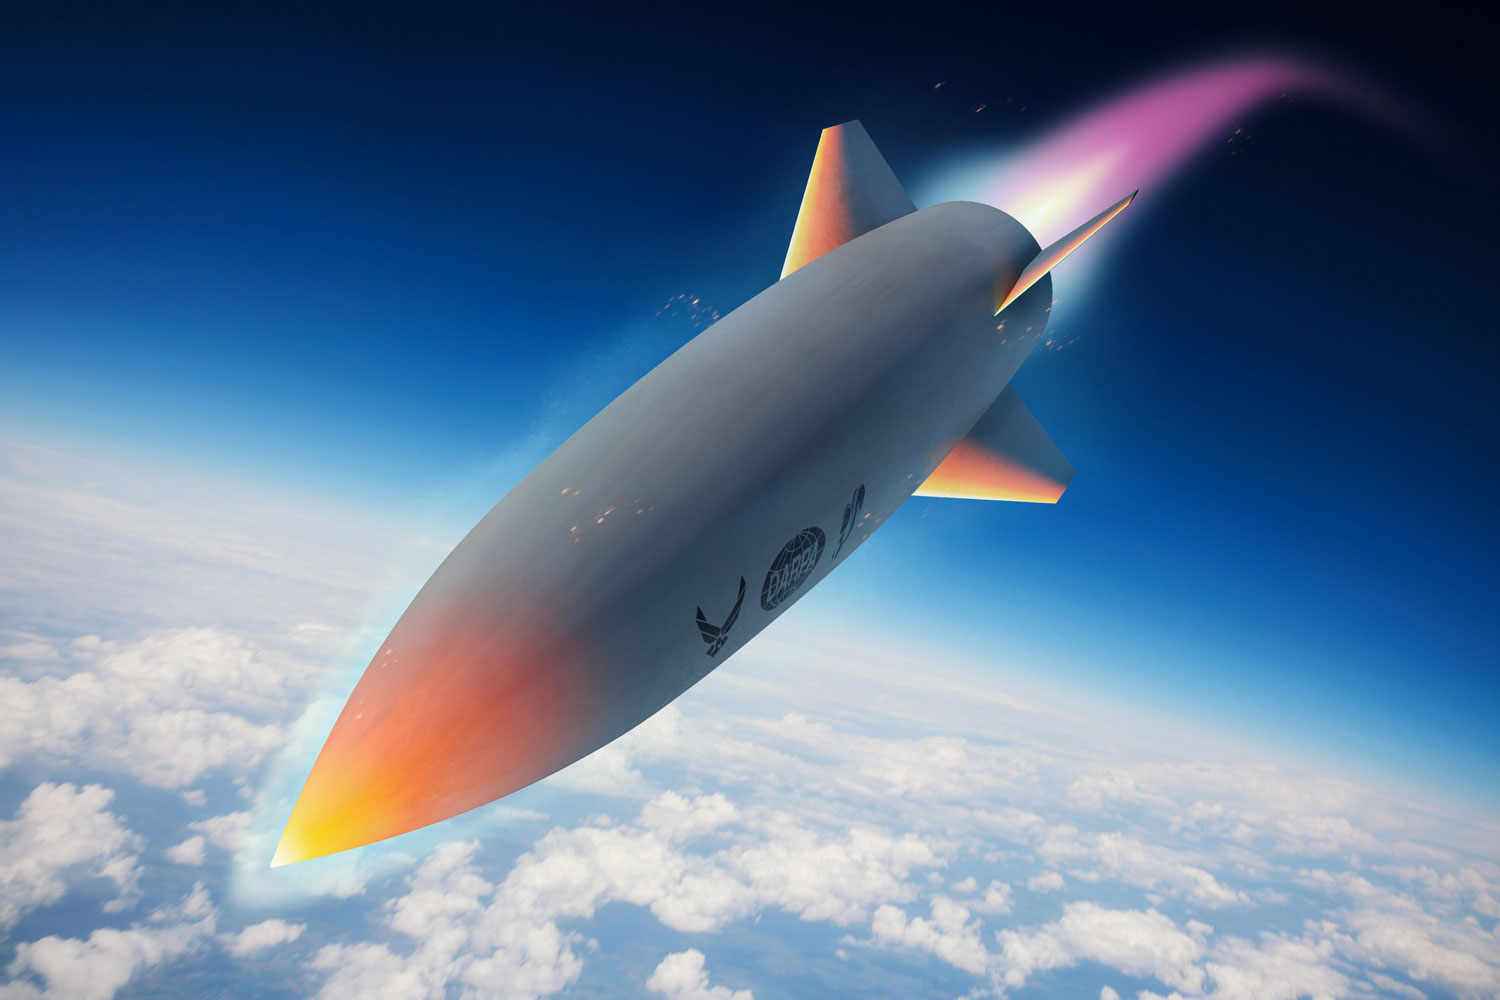 Raytheon ‘Beats’ Lockheed Martin & Boeing To Win Contract To Develop ‘One Of Its Kind’ Hypersonic Cruise Missile